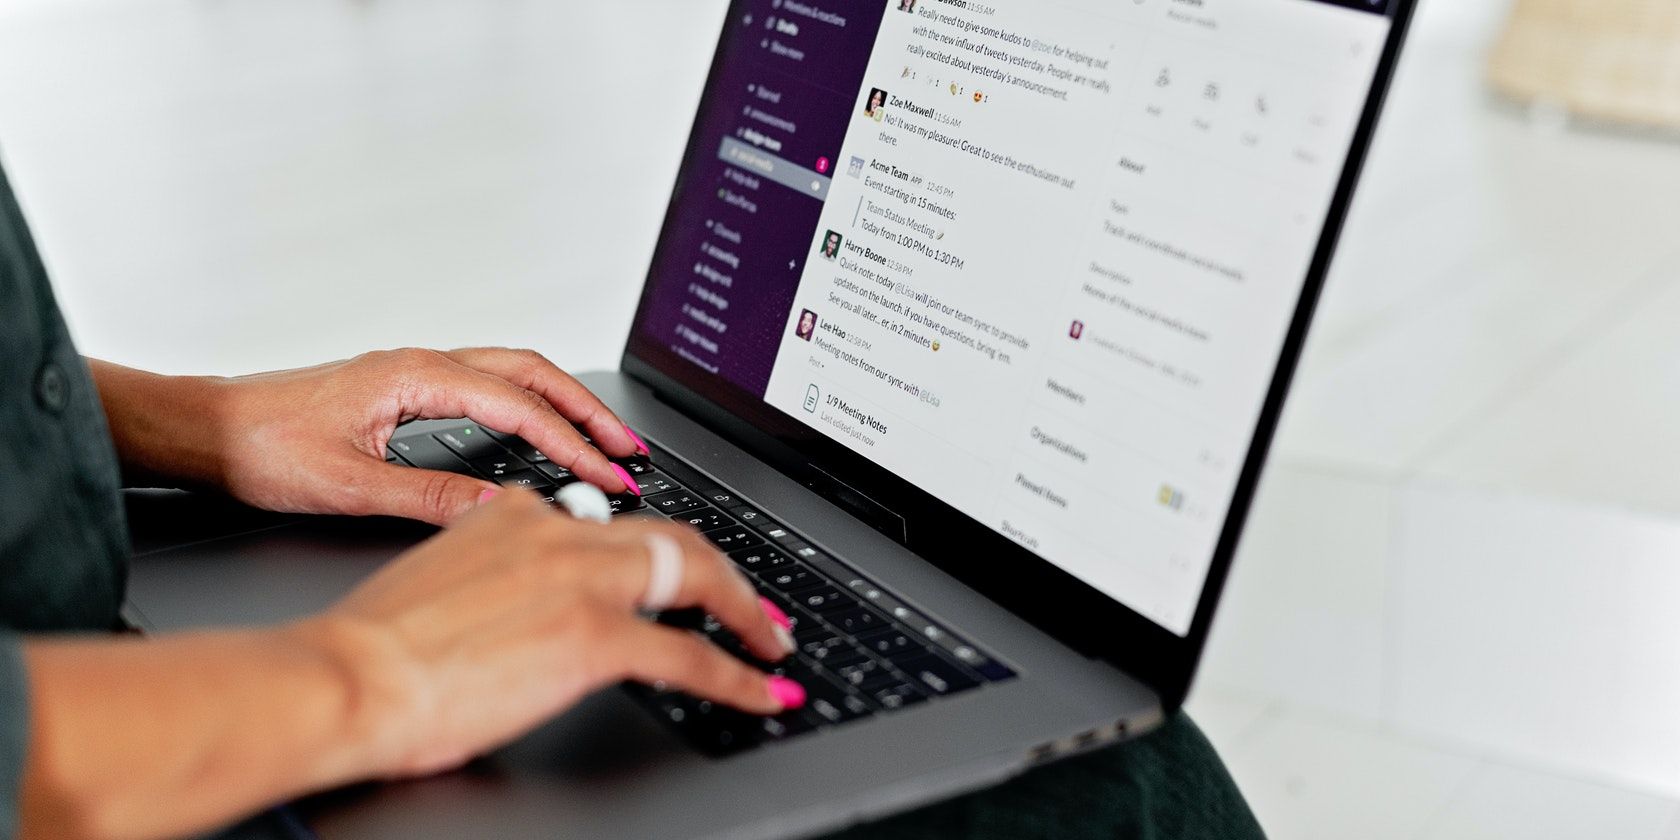 Image shows a woman typing in Slack on a laptop